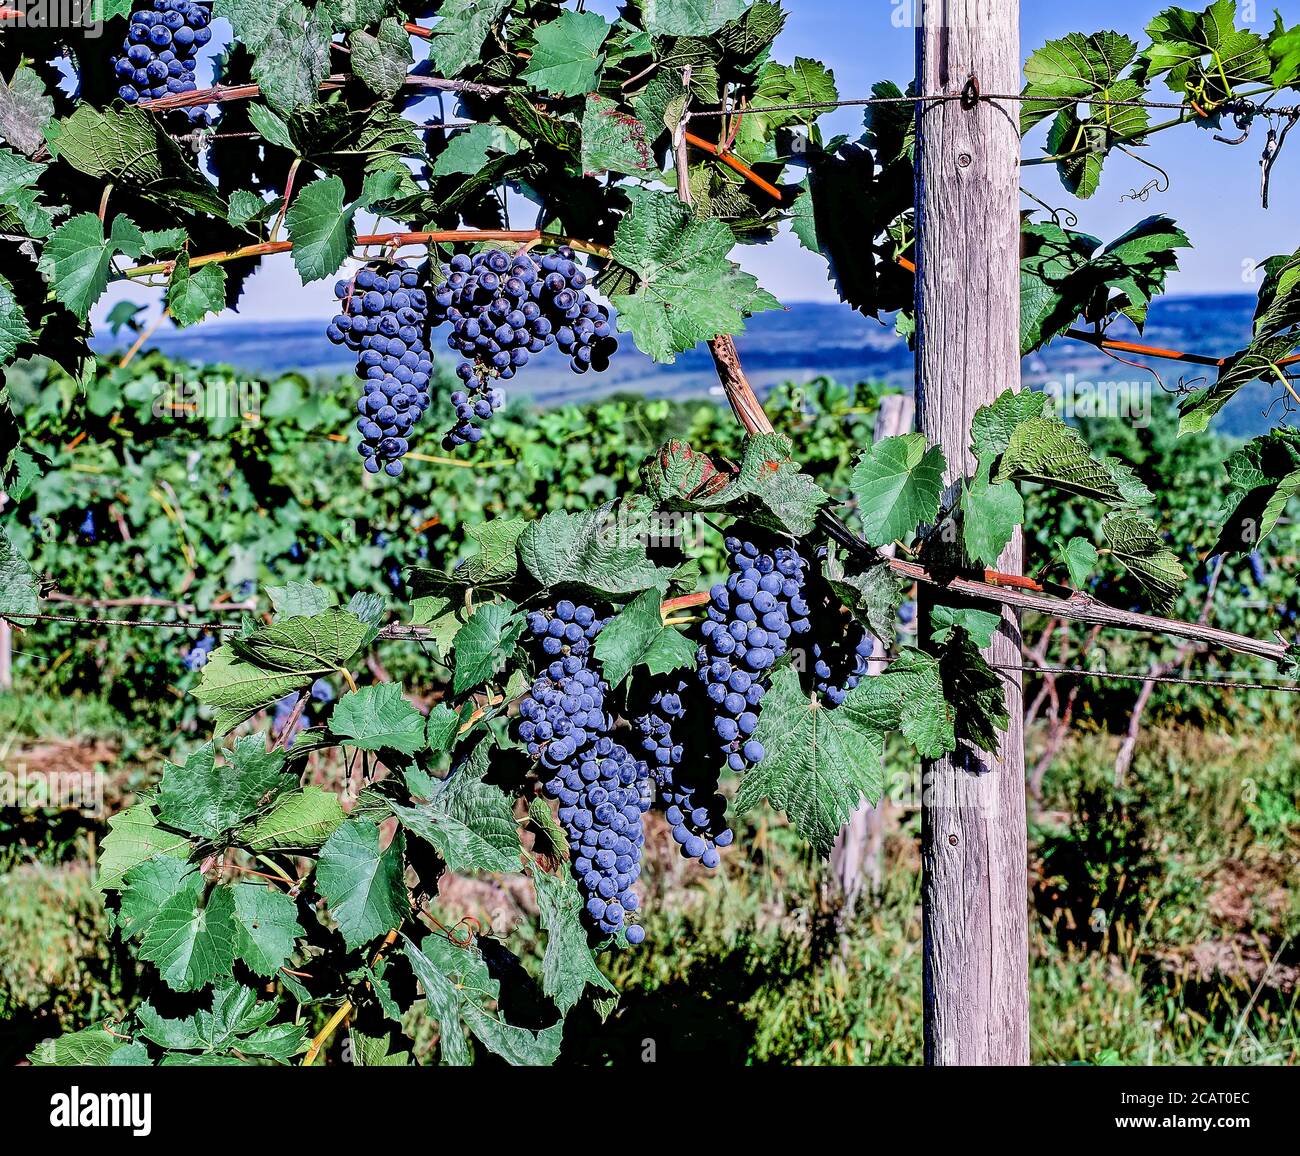 Grapes ready for picking growing in vineyard in the Finger Lakes Region of New York State in the United States Stock Photo